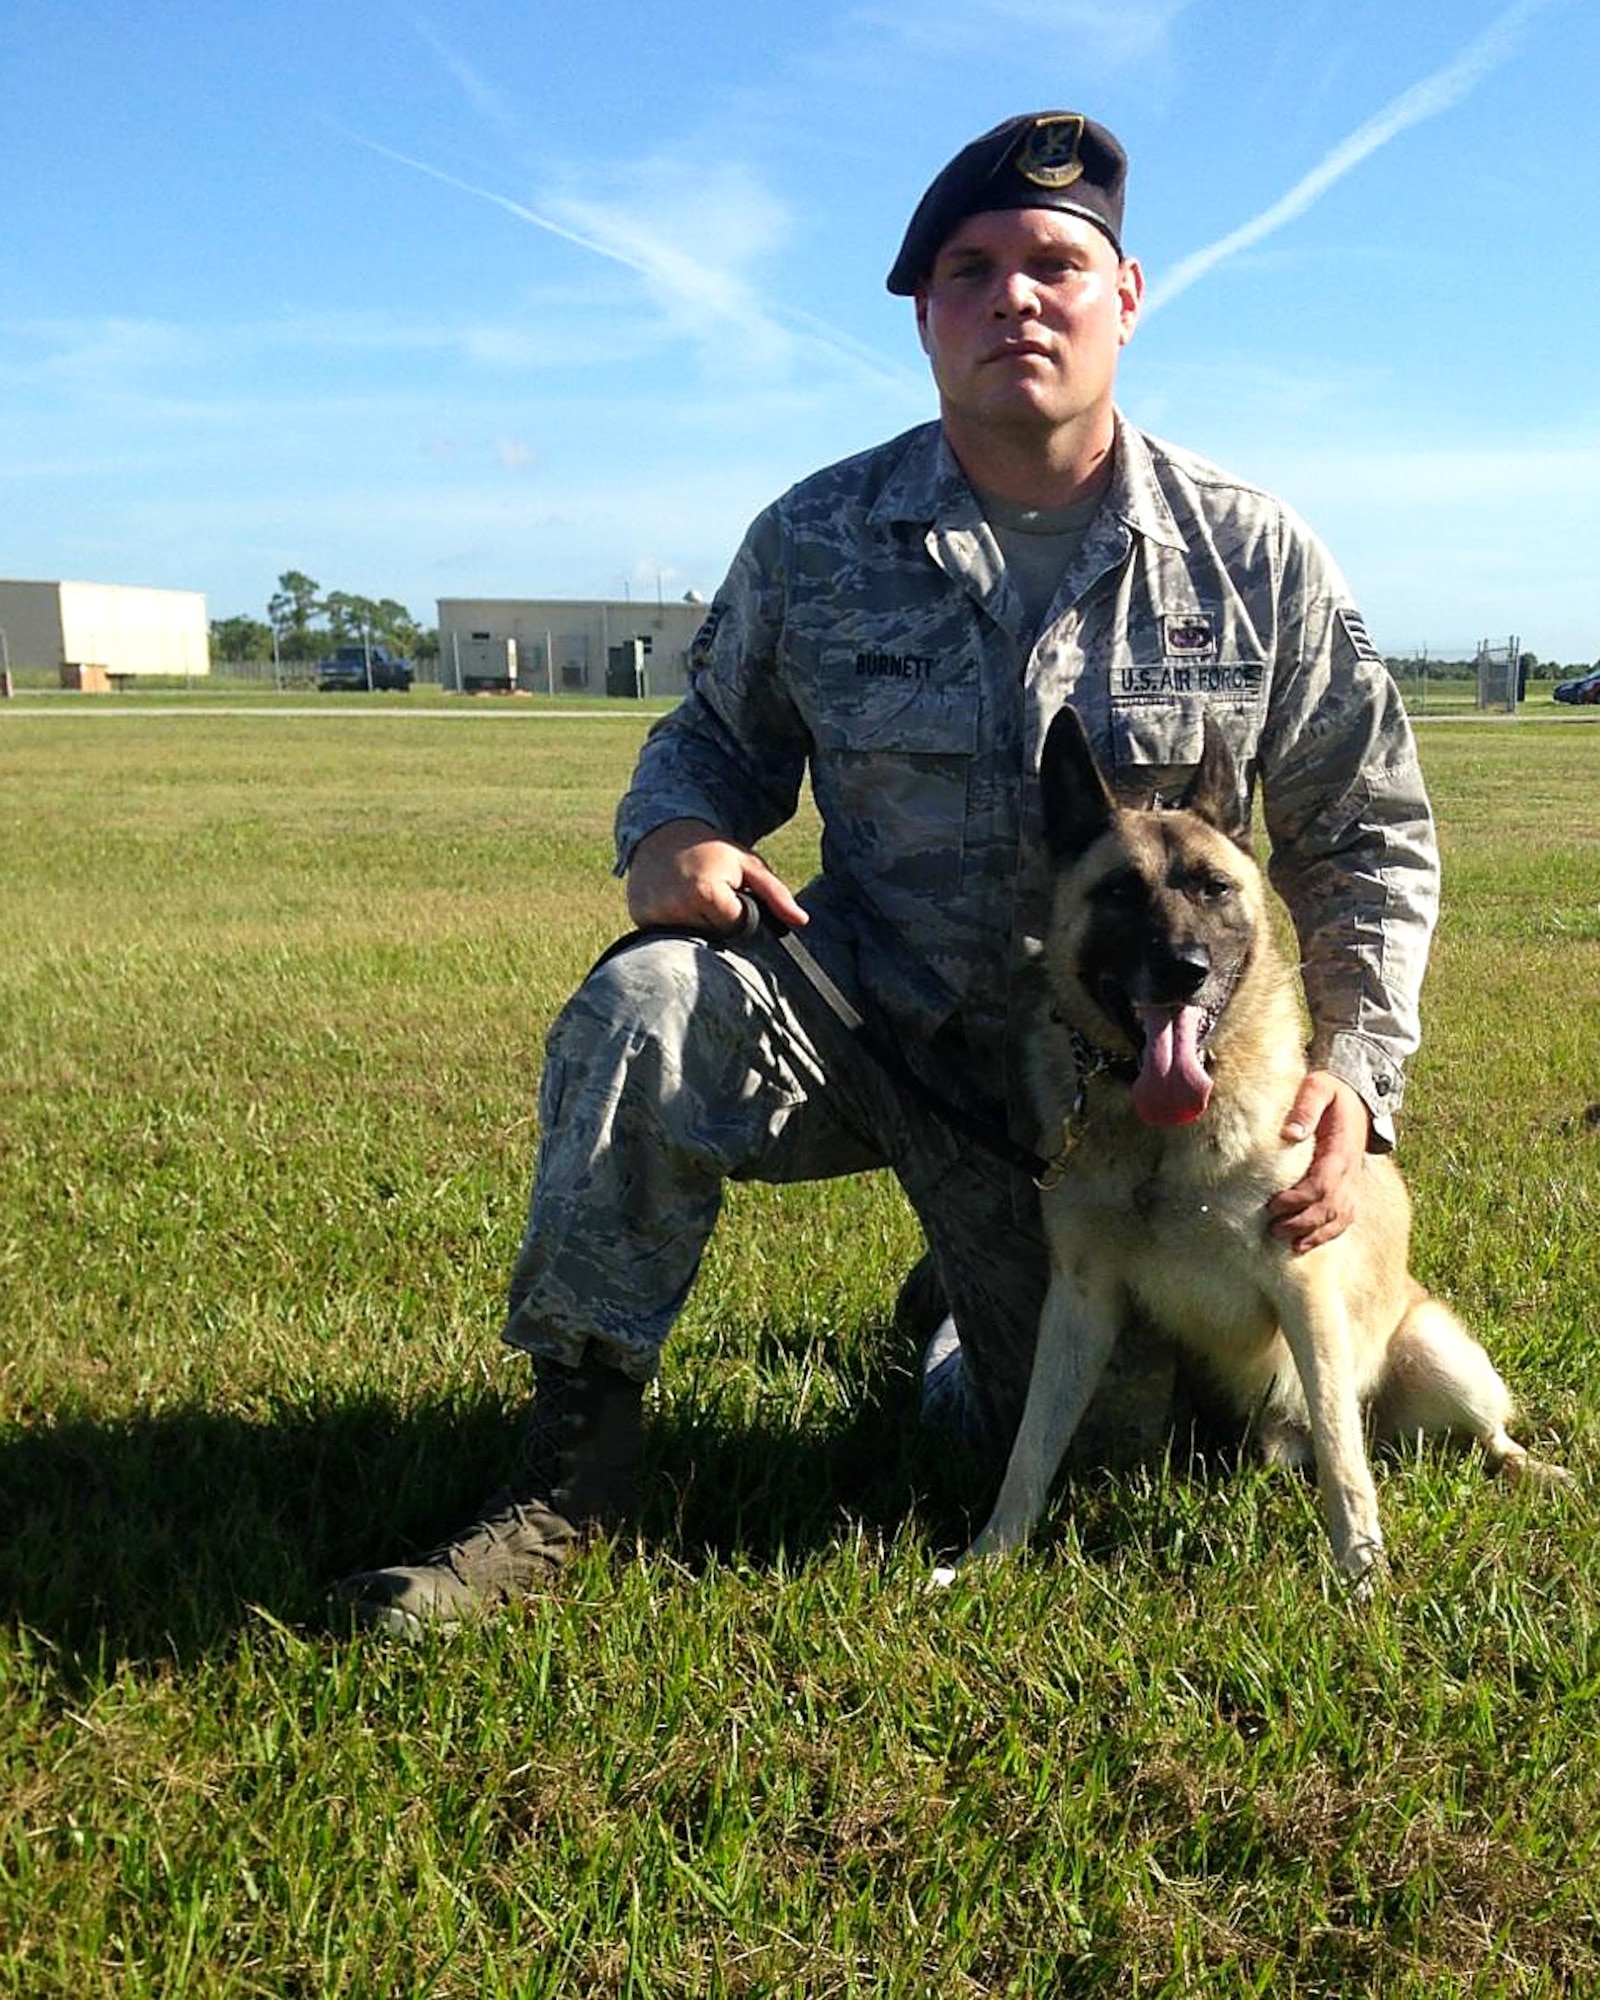 Josh Burnett, a former U.S. Air Force Staff Sgt. and 6th Security Forces military working dog (MWD) handler, poses for a photo with his partner Jecky MWD, Dec. 22, 2014, at MacDill Air Force Base, Fla.  Burnett was Jecky’s handler for 3 years while stationed at MacDill and adopted Jecky following his retirement May 28, 2019.  (Courtesy photo)